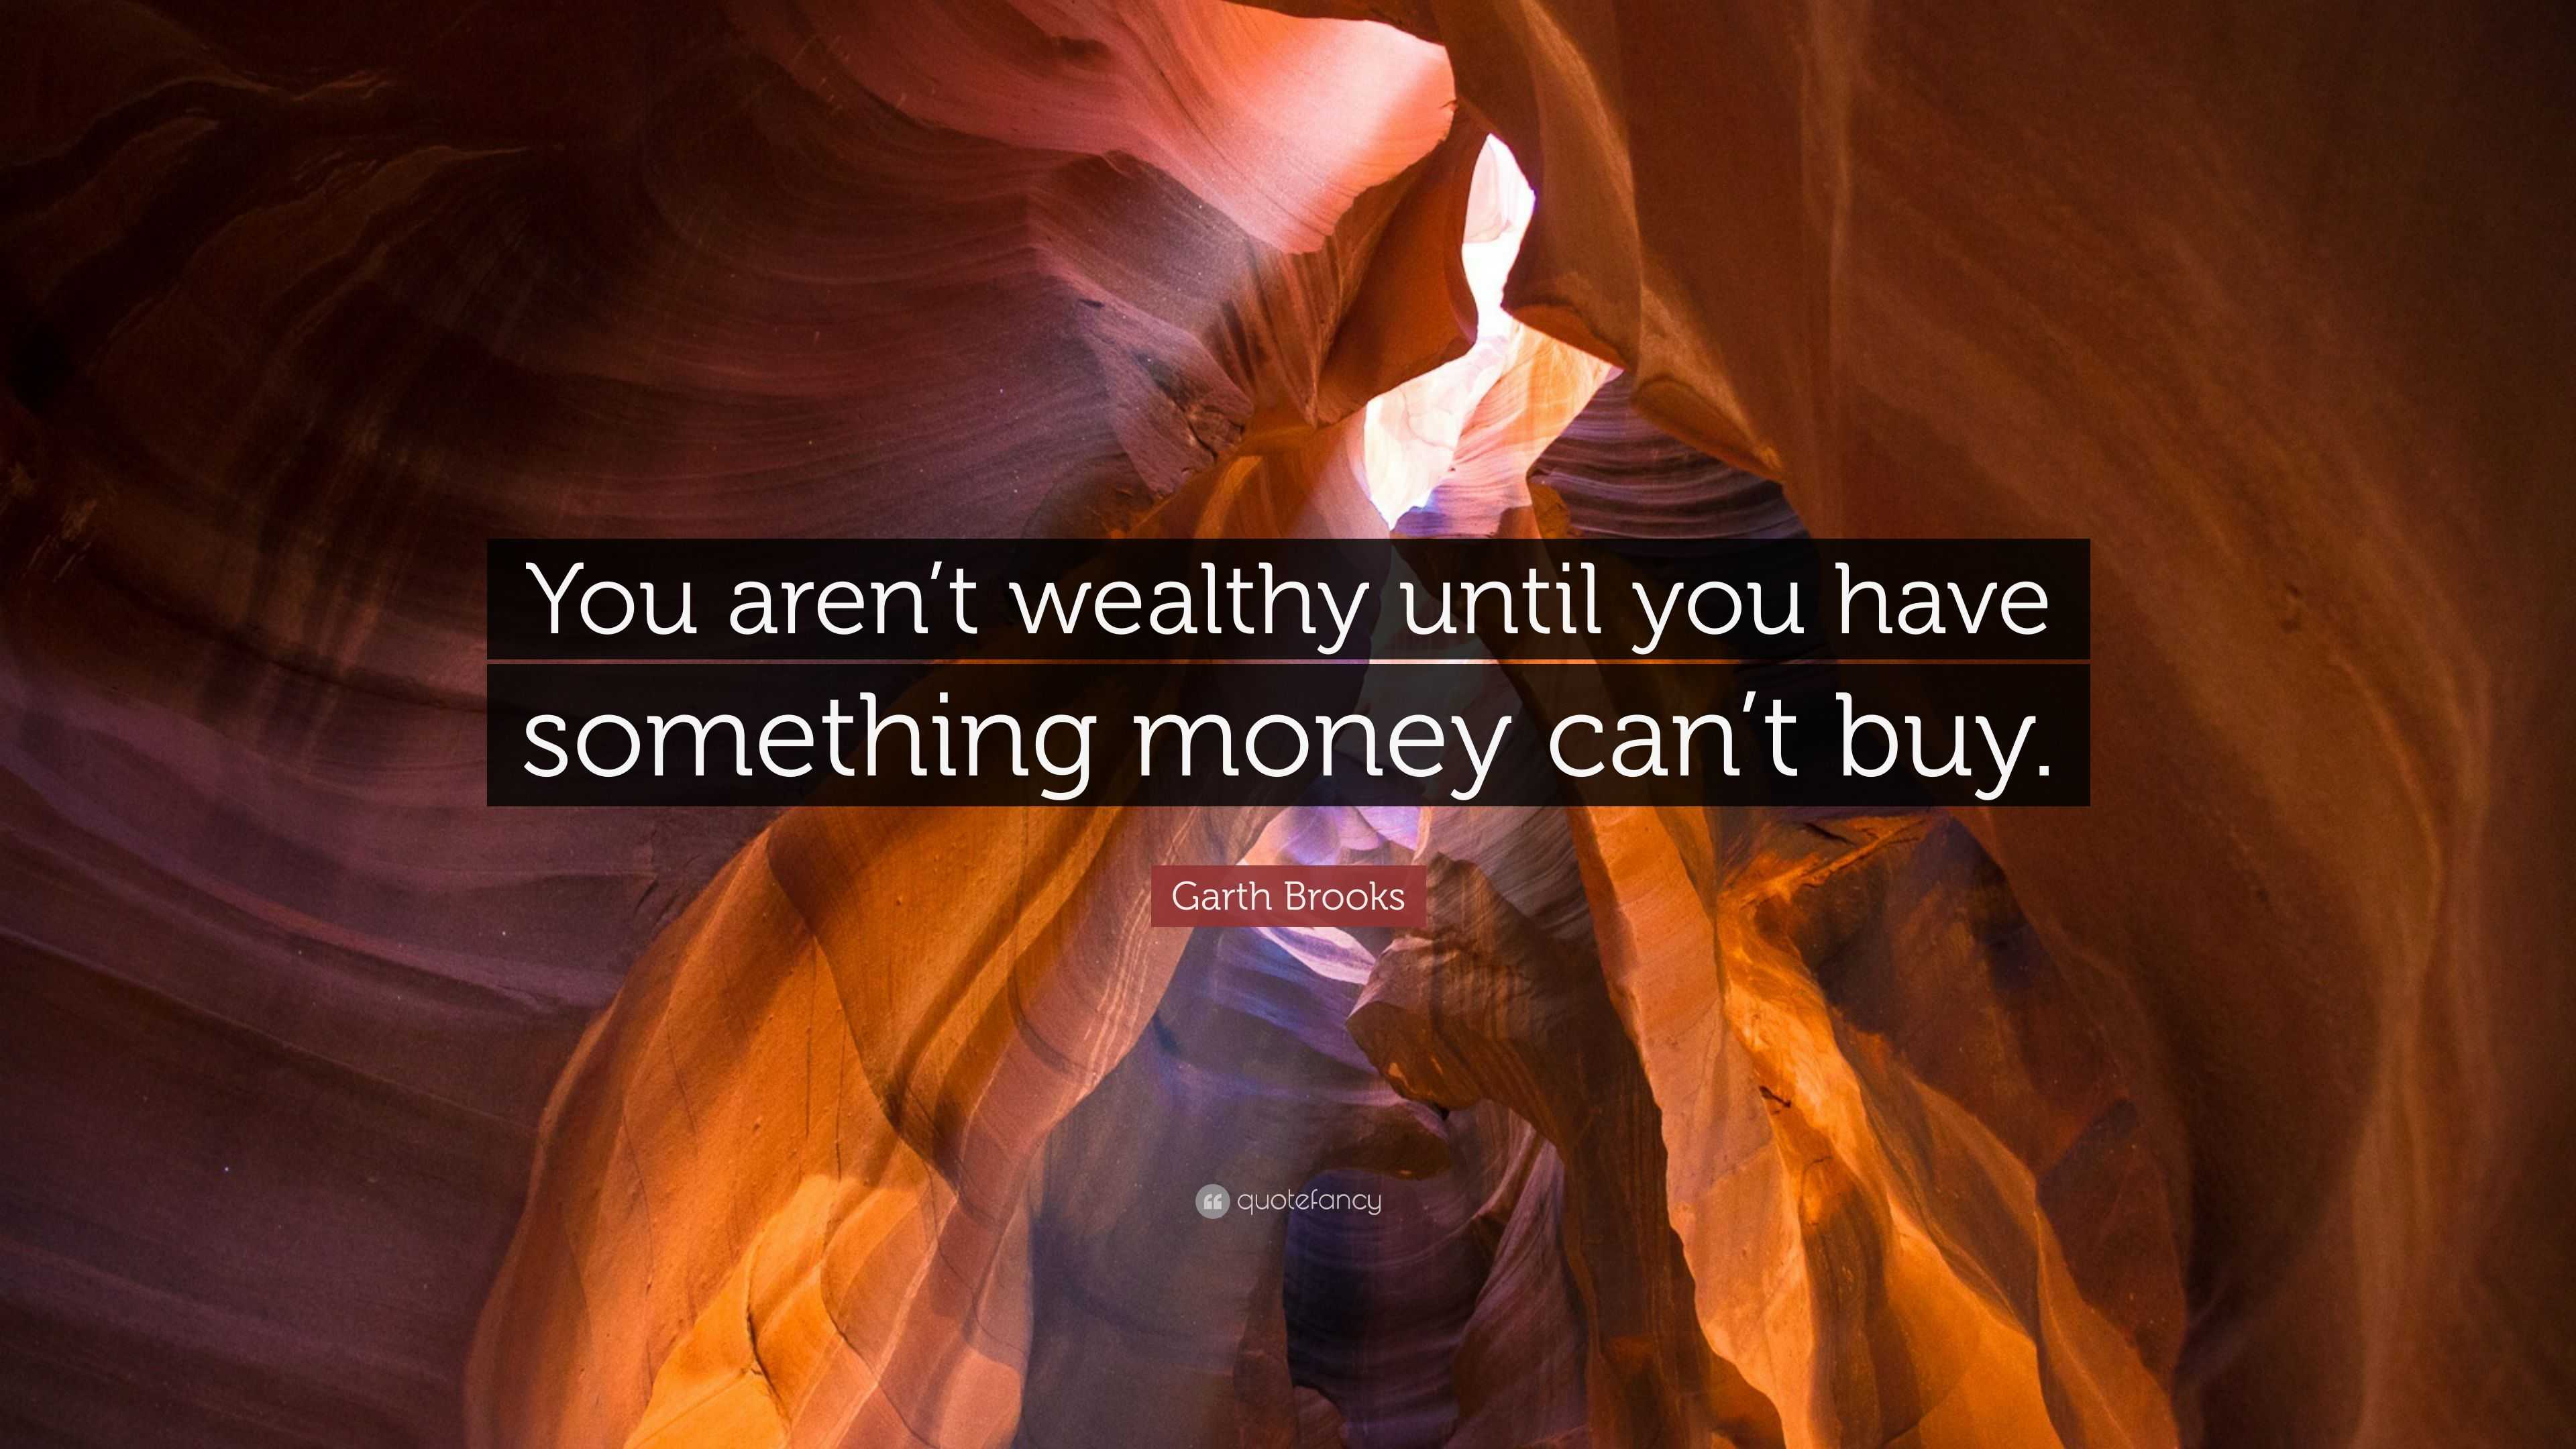 Garth Brooks Quote “you Arent Wealthy Until You Have Something Money Cant Buy”